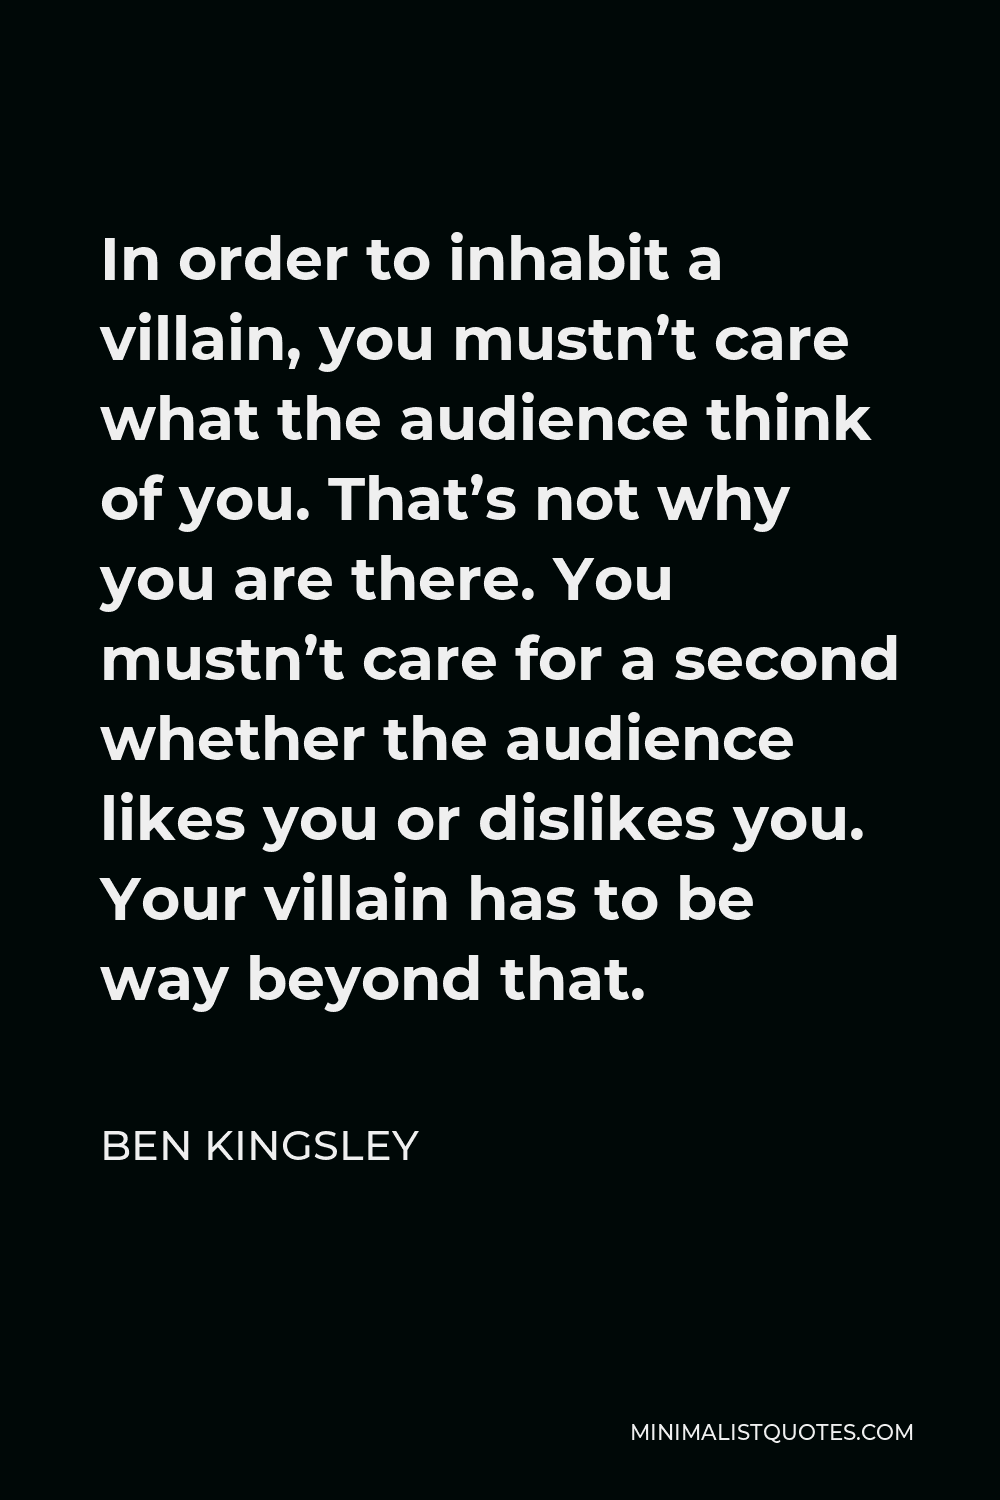 Ben Kingsley Quote - In order to inhabit a villain, you mustn’t care what the audience think of you. That’s not why you are there. You mustn’t care for a second whether the audience likes you or dislikes you. Your villain has to be way beyond that.